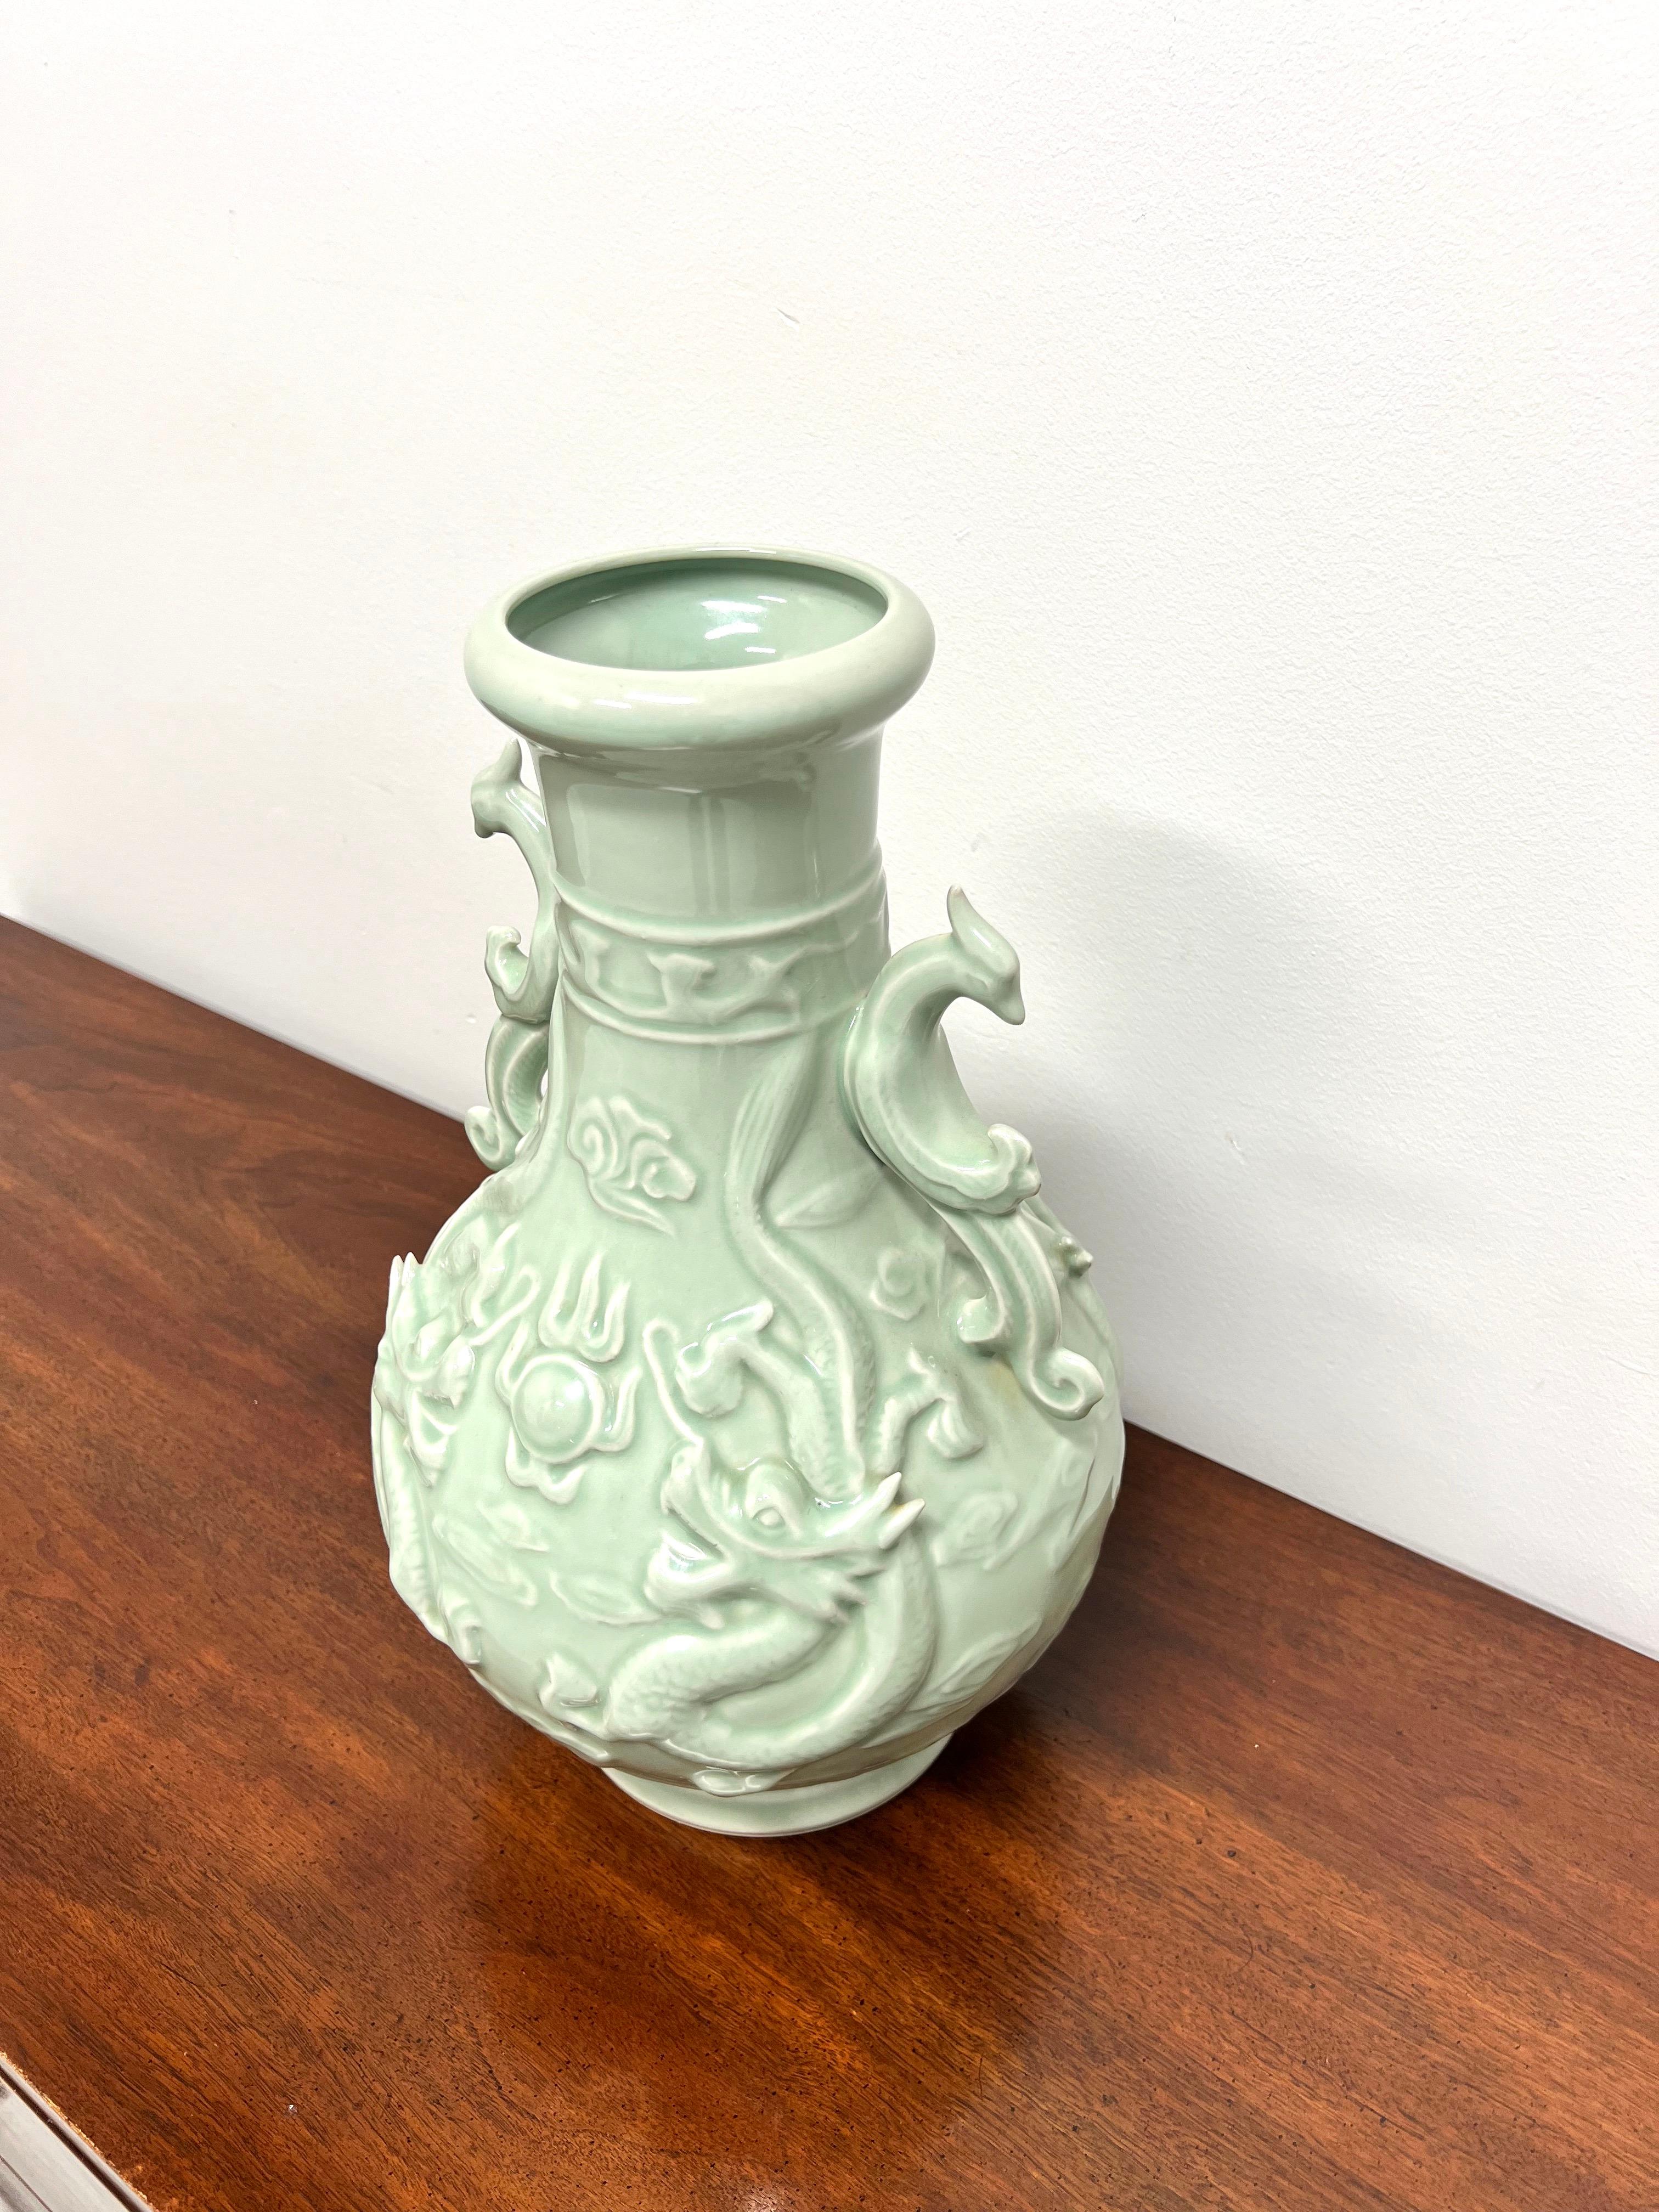 A Chinese Export large dragon motif porcelain urn with bird-like handles. Unsigned, artist unknown. Green color porcelain with a glazed finish. Made in China, in the mid 20th Century.

Measures: 10w 10d 17.25h, Weighs Approximately: 14